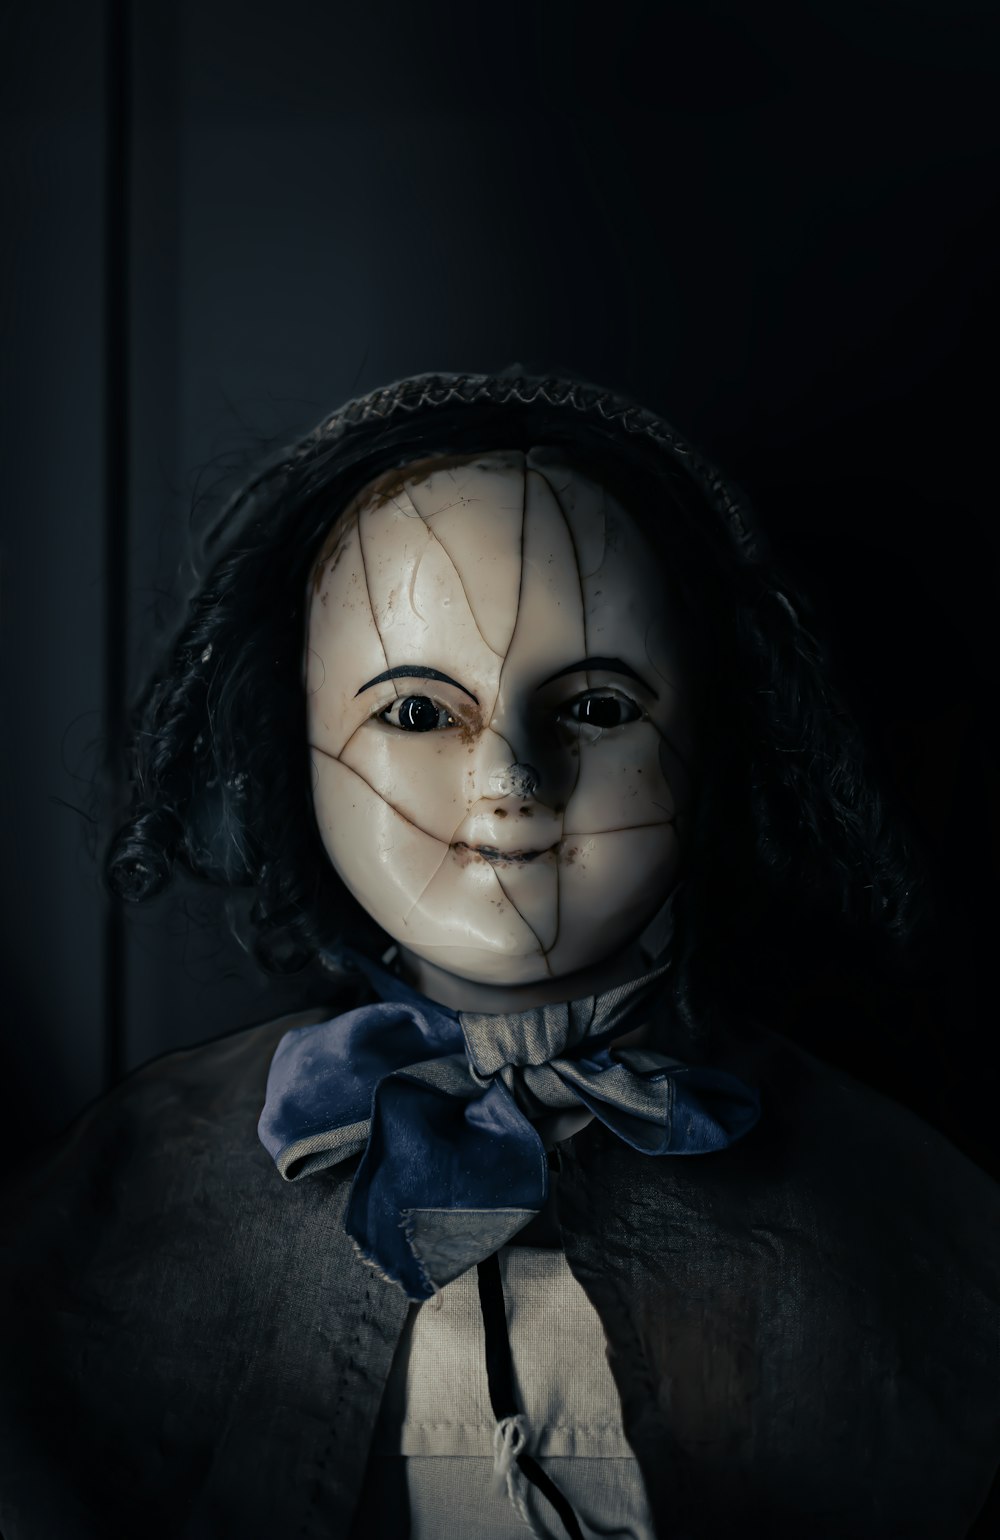 a creepy doll with a creepy look on its face